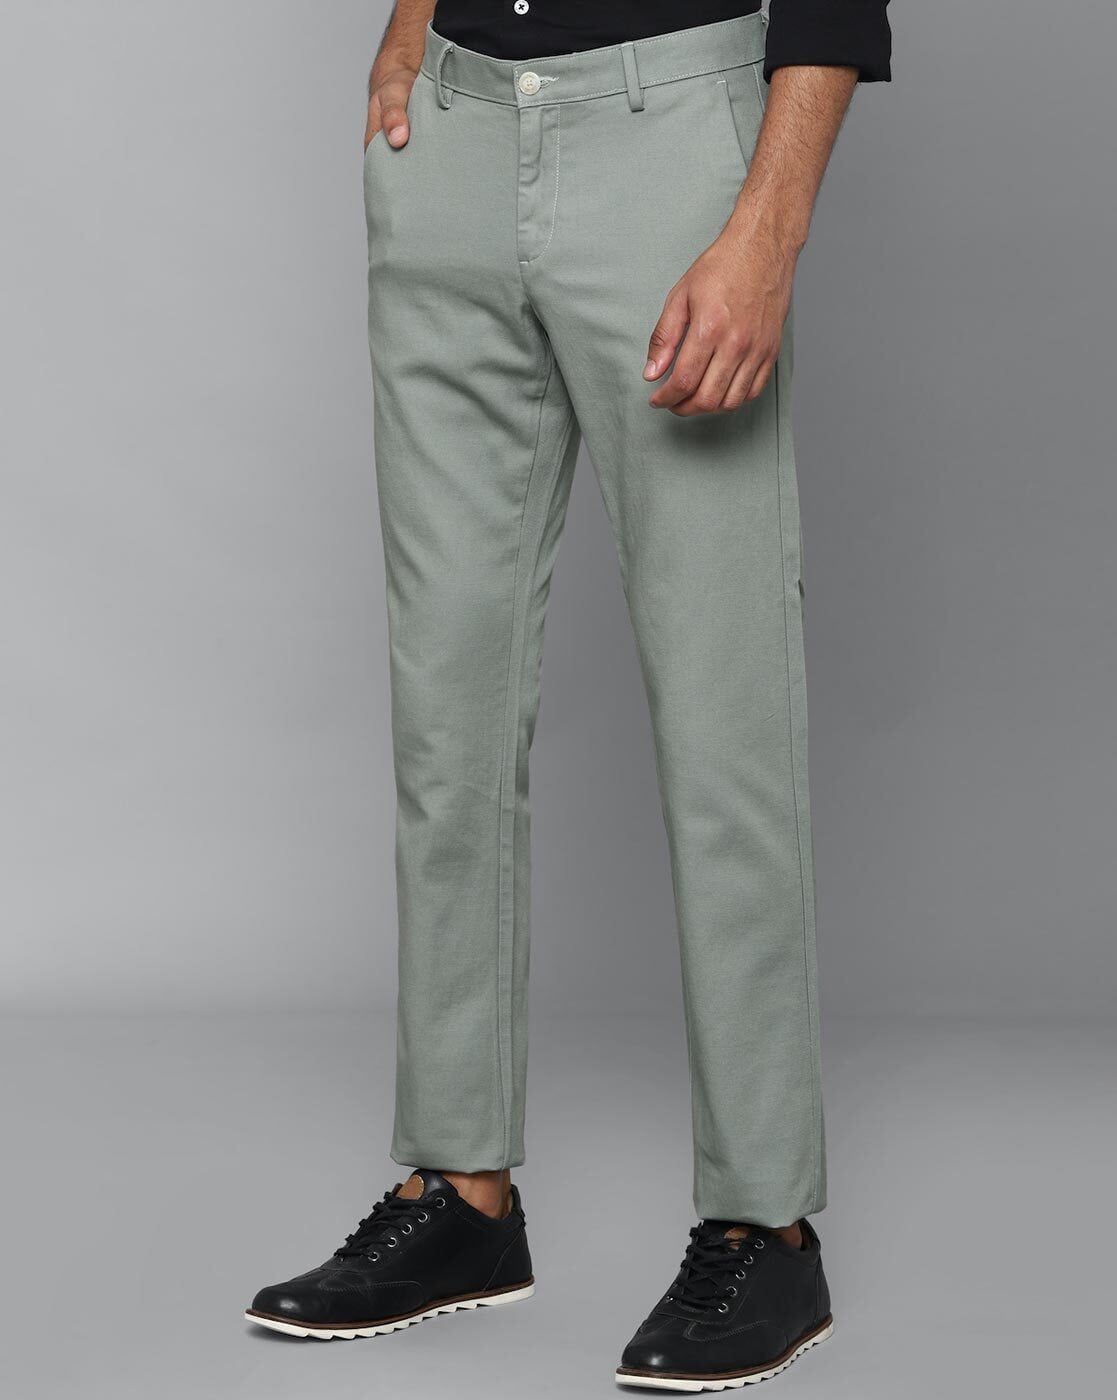 Buy ALLEN SOLLY Textured Cotton Blend Slim Fit Mens Work Wear Trousers   Shoppers Stop